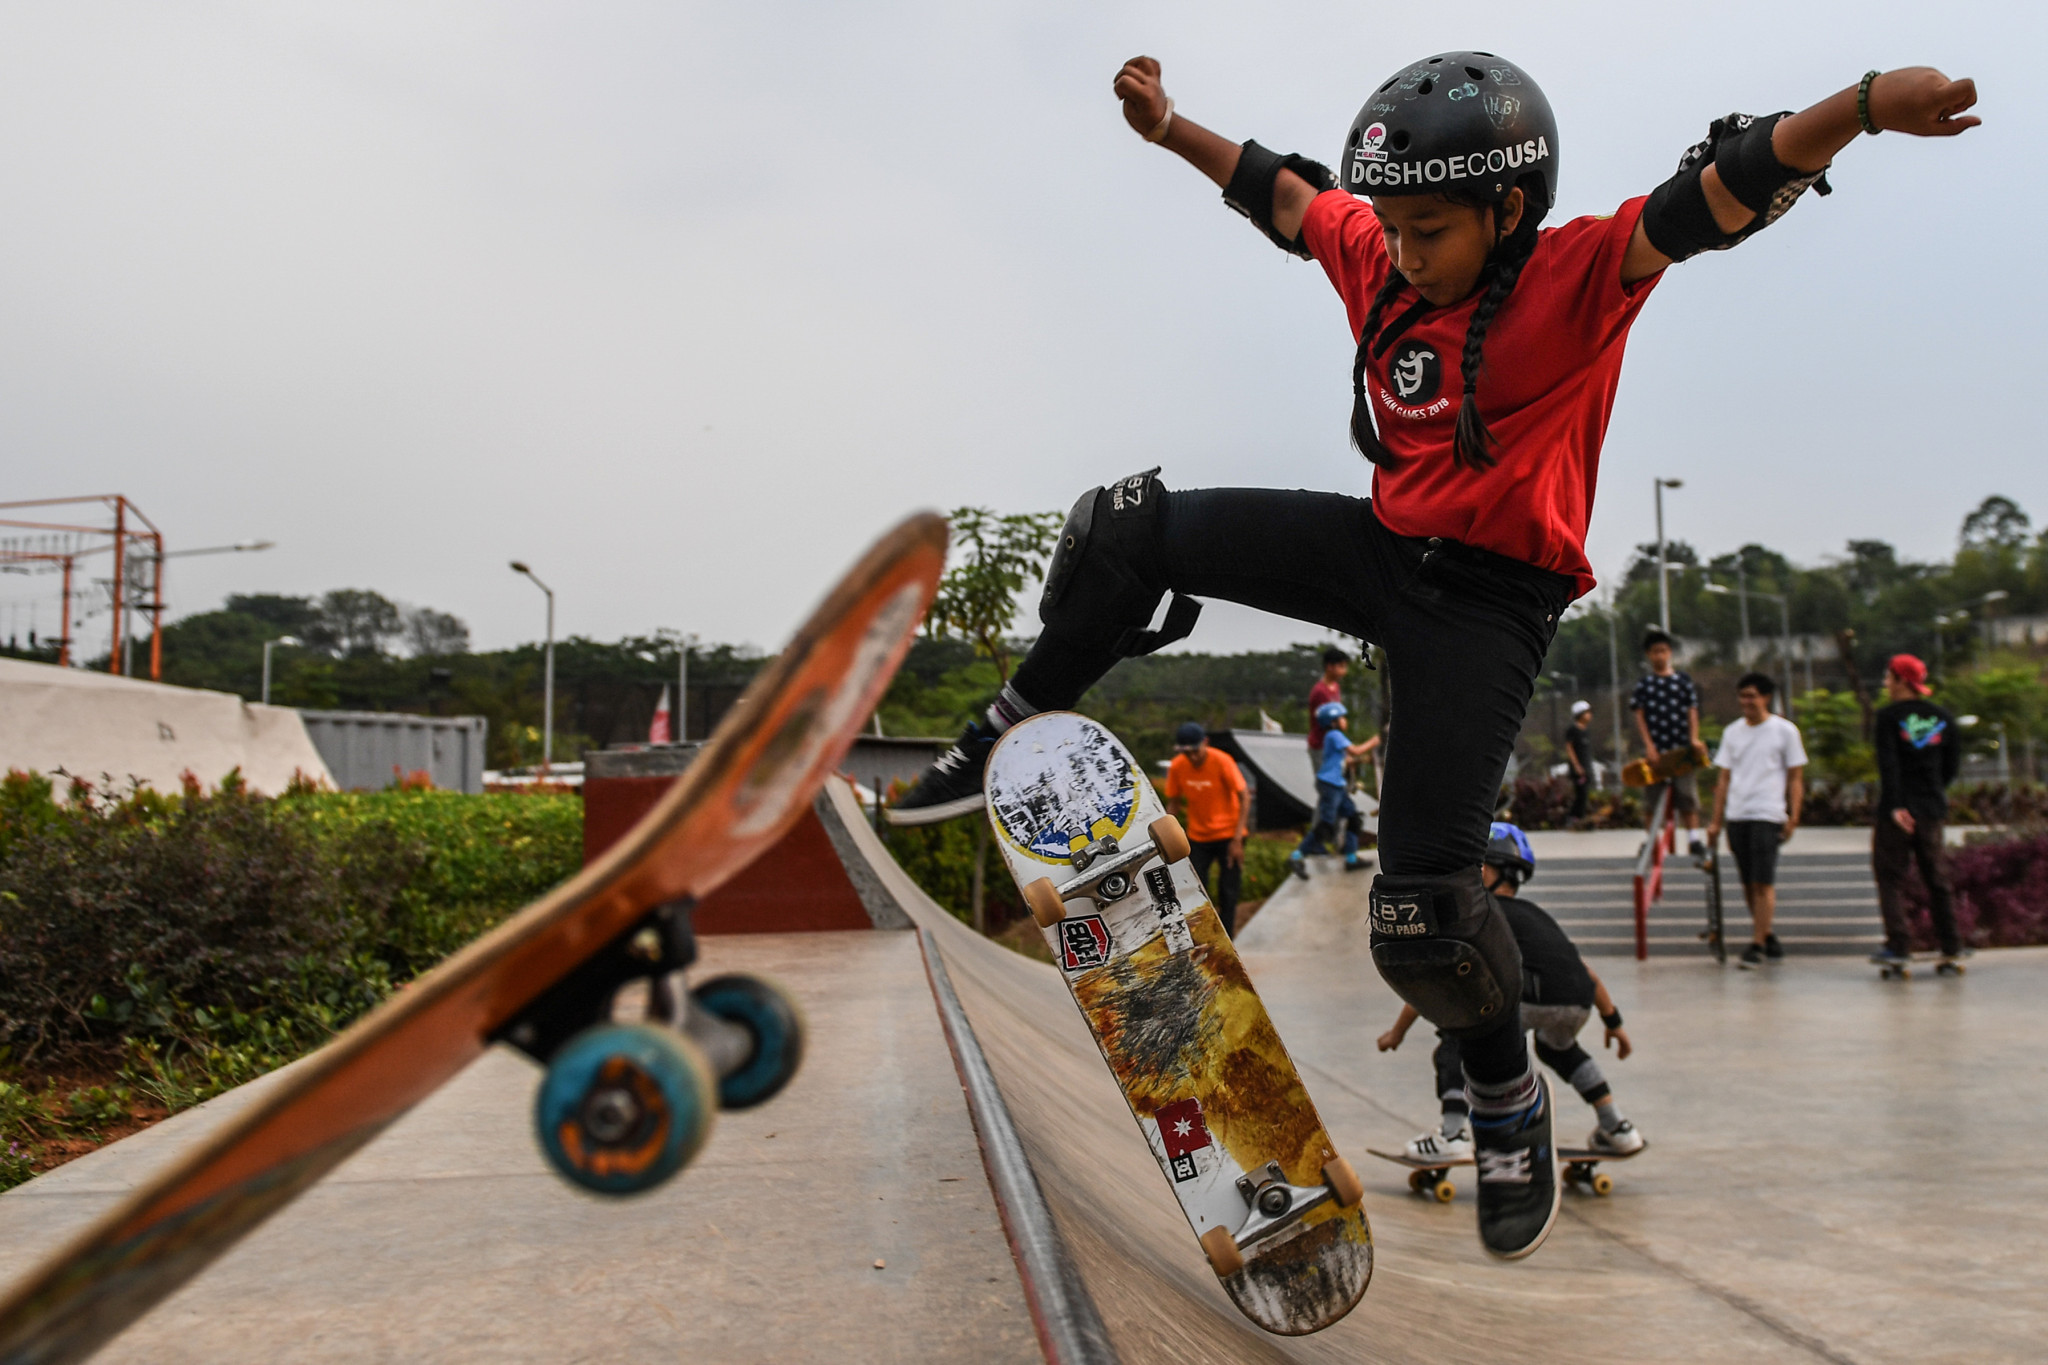 Indonesia's incredible nine year old skateboarder Aliqqa Novvery finished sixth in the women's street final as her compatriot Bunga Nyimas, who is just 12, took bronze ©Getty Images